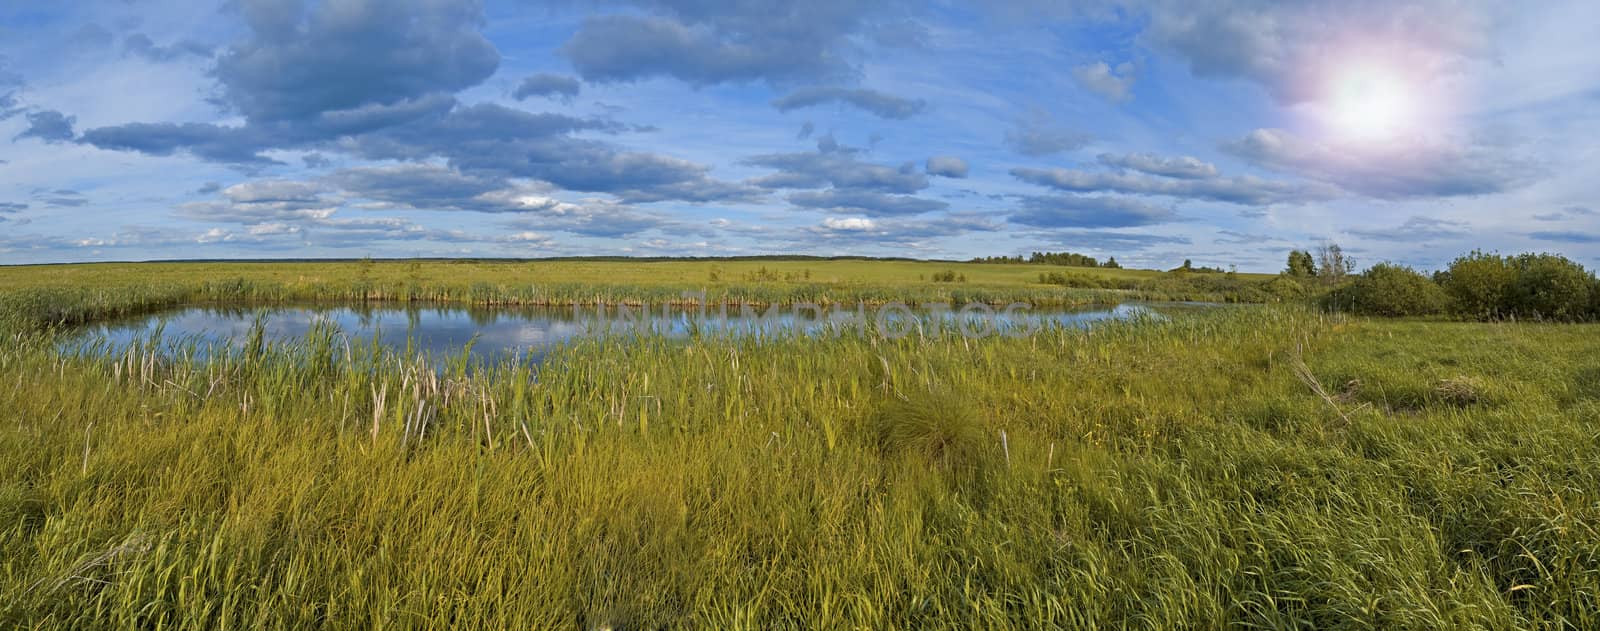 Small pond and swamp | Panorama by zakaz